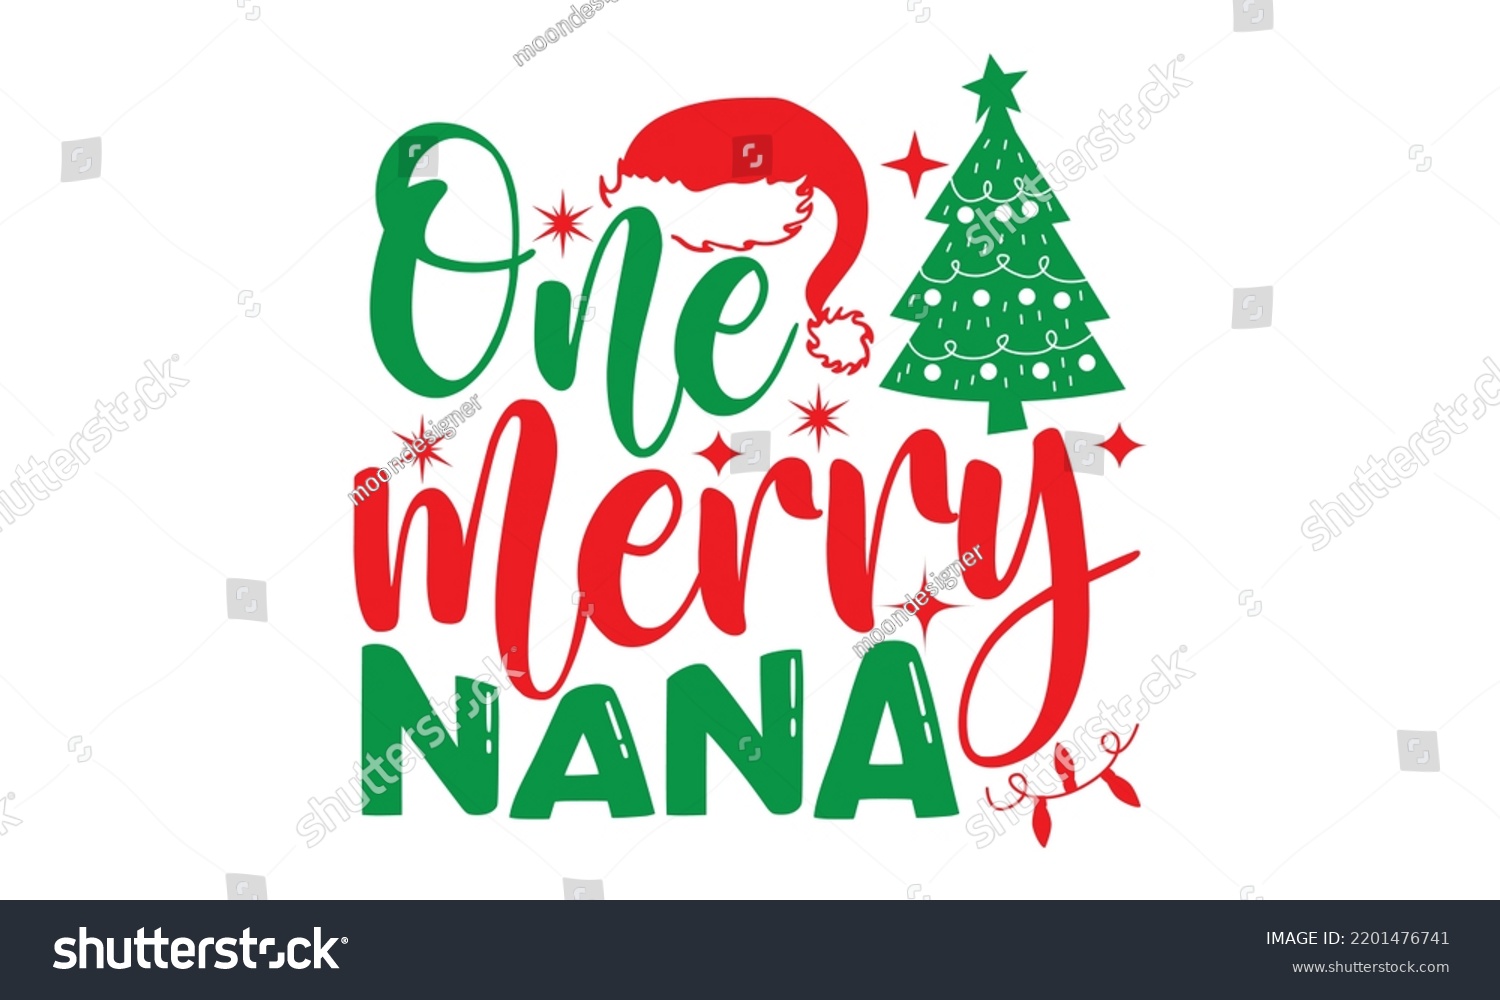 SVG of One merry nana- Christmas SVG and T shirt design, Good for scrapbooking, holiday vector, gift cad, templet, Christmas Quote Design, EPS 10 svg